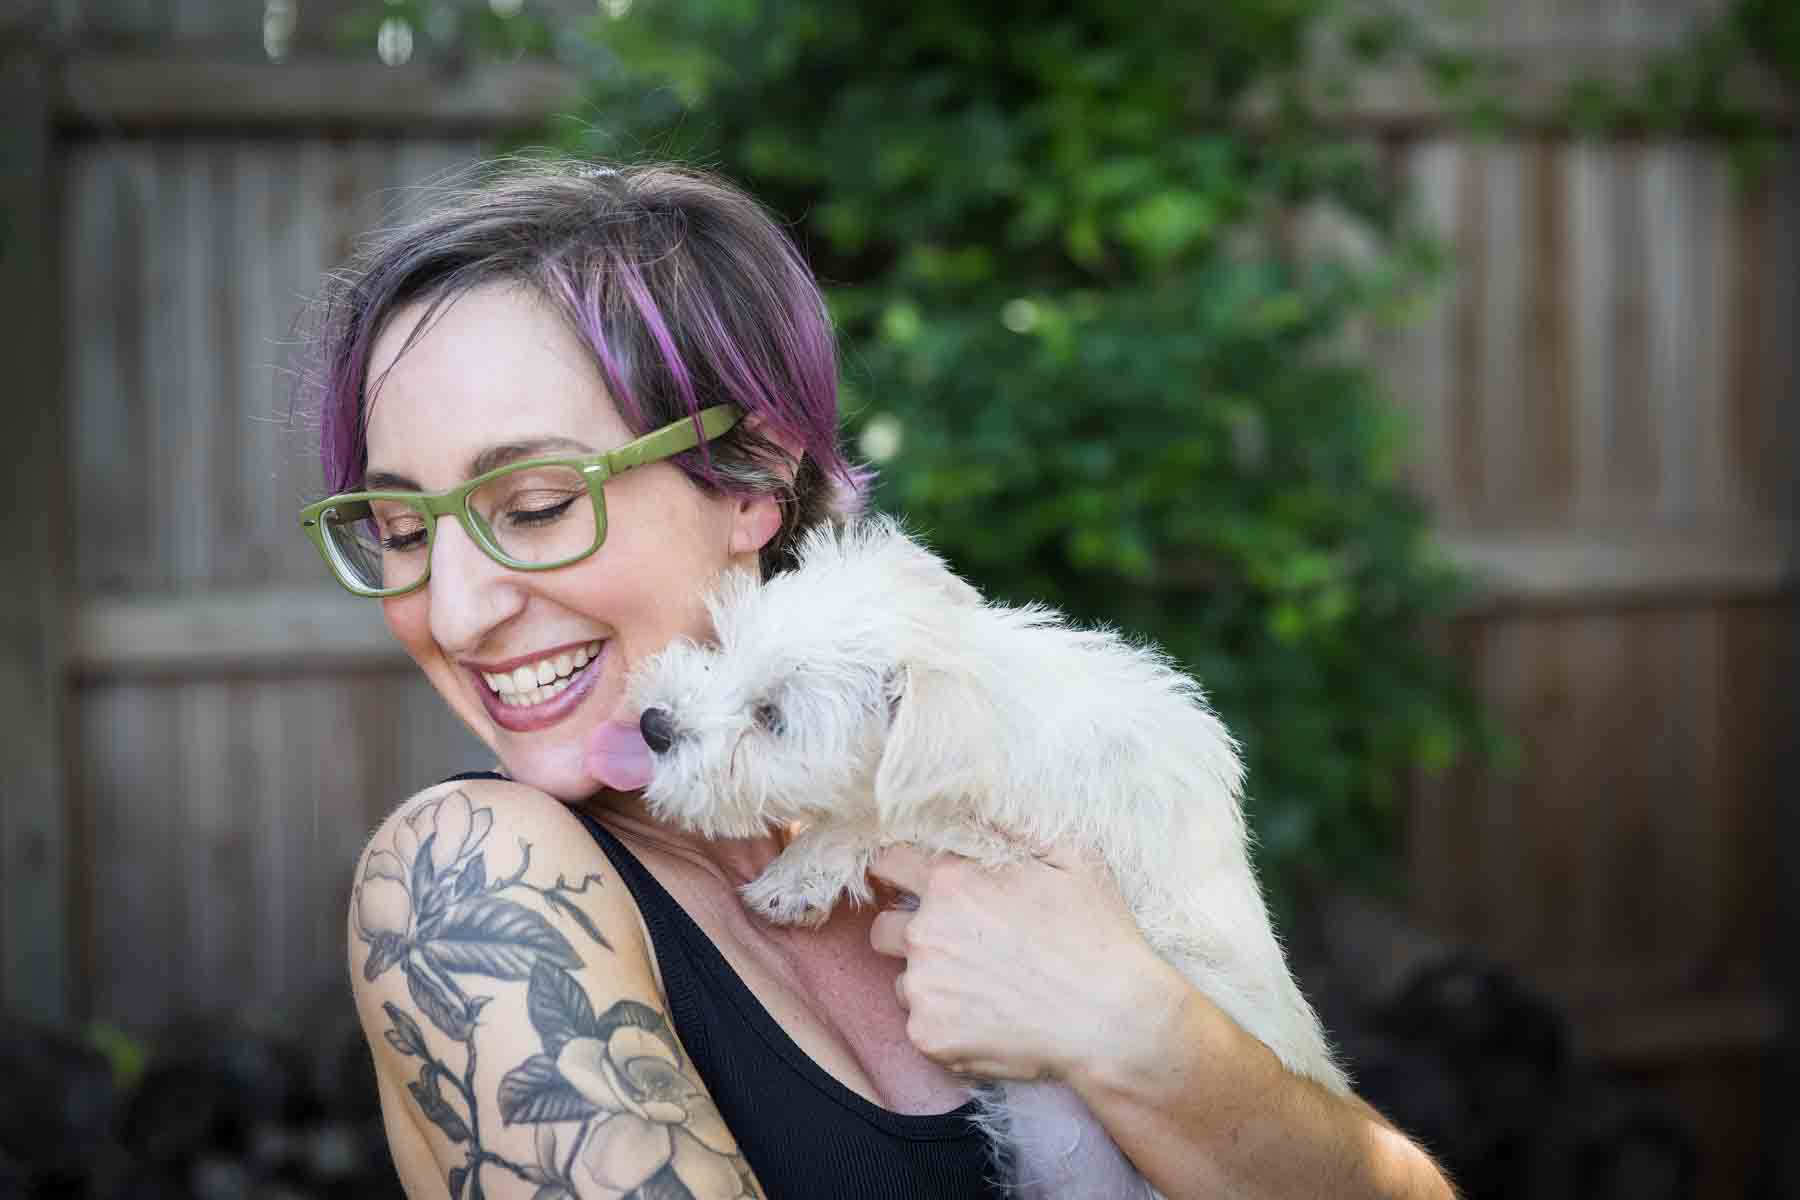 Woman with purple hair and glasses holding a white puppy for an article on pet photo tips